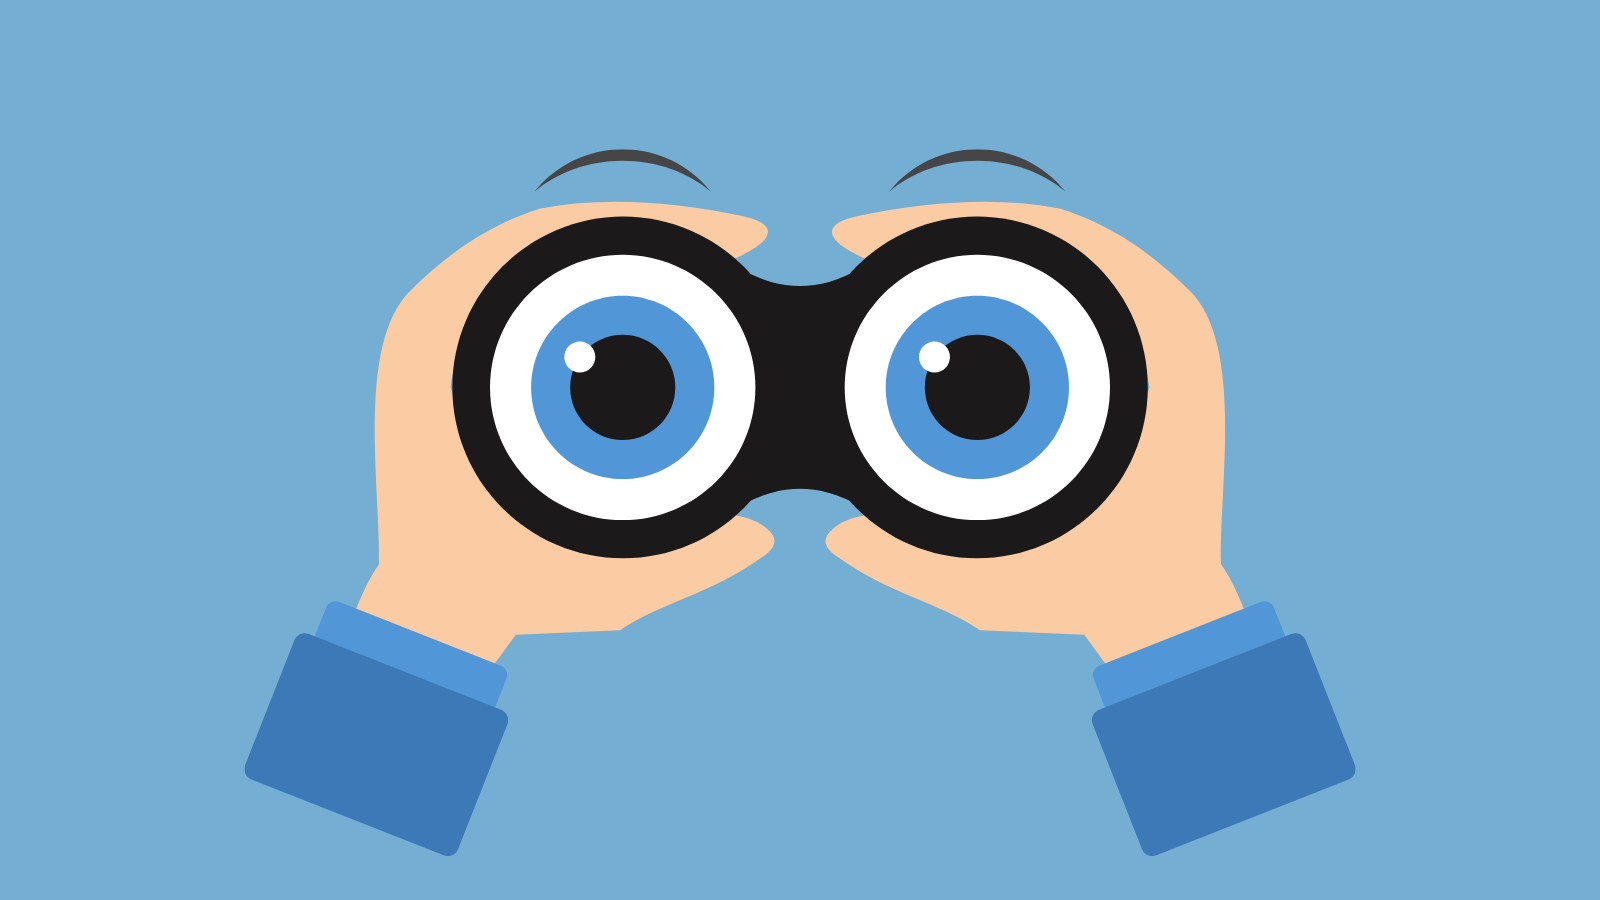 Hands holding up a pair of binoculars. Eyes are visible in the lenses. 